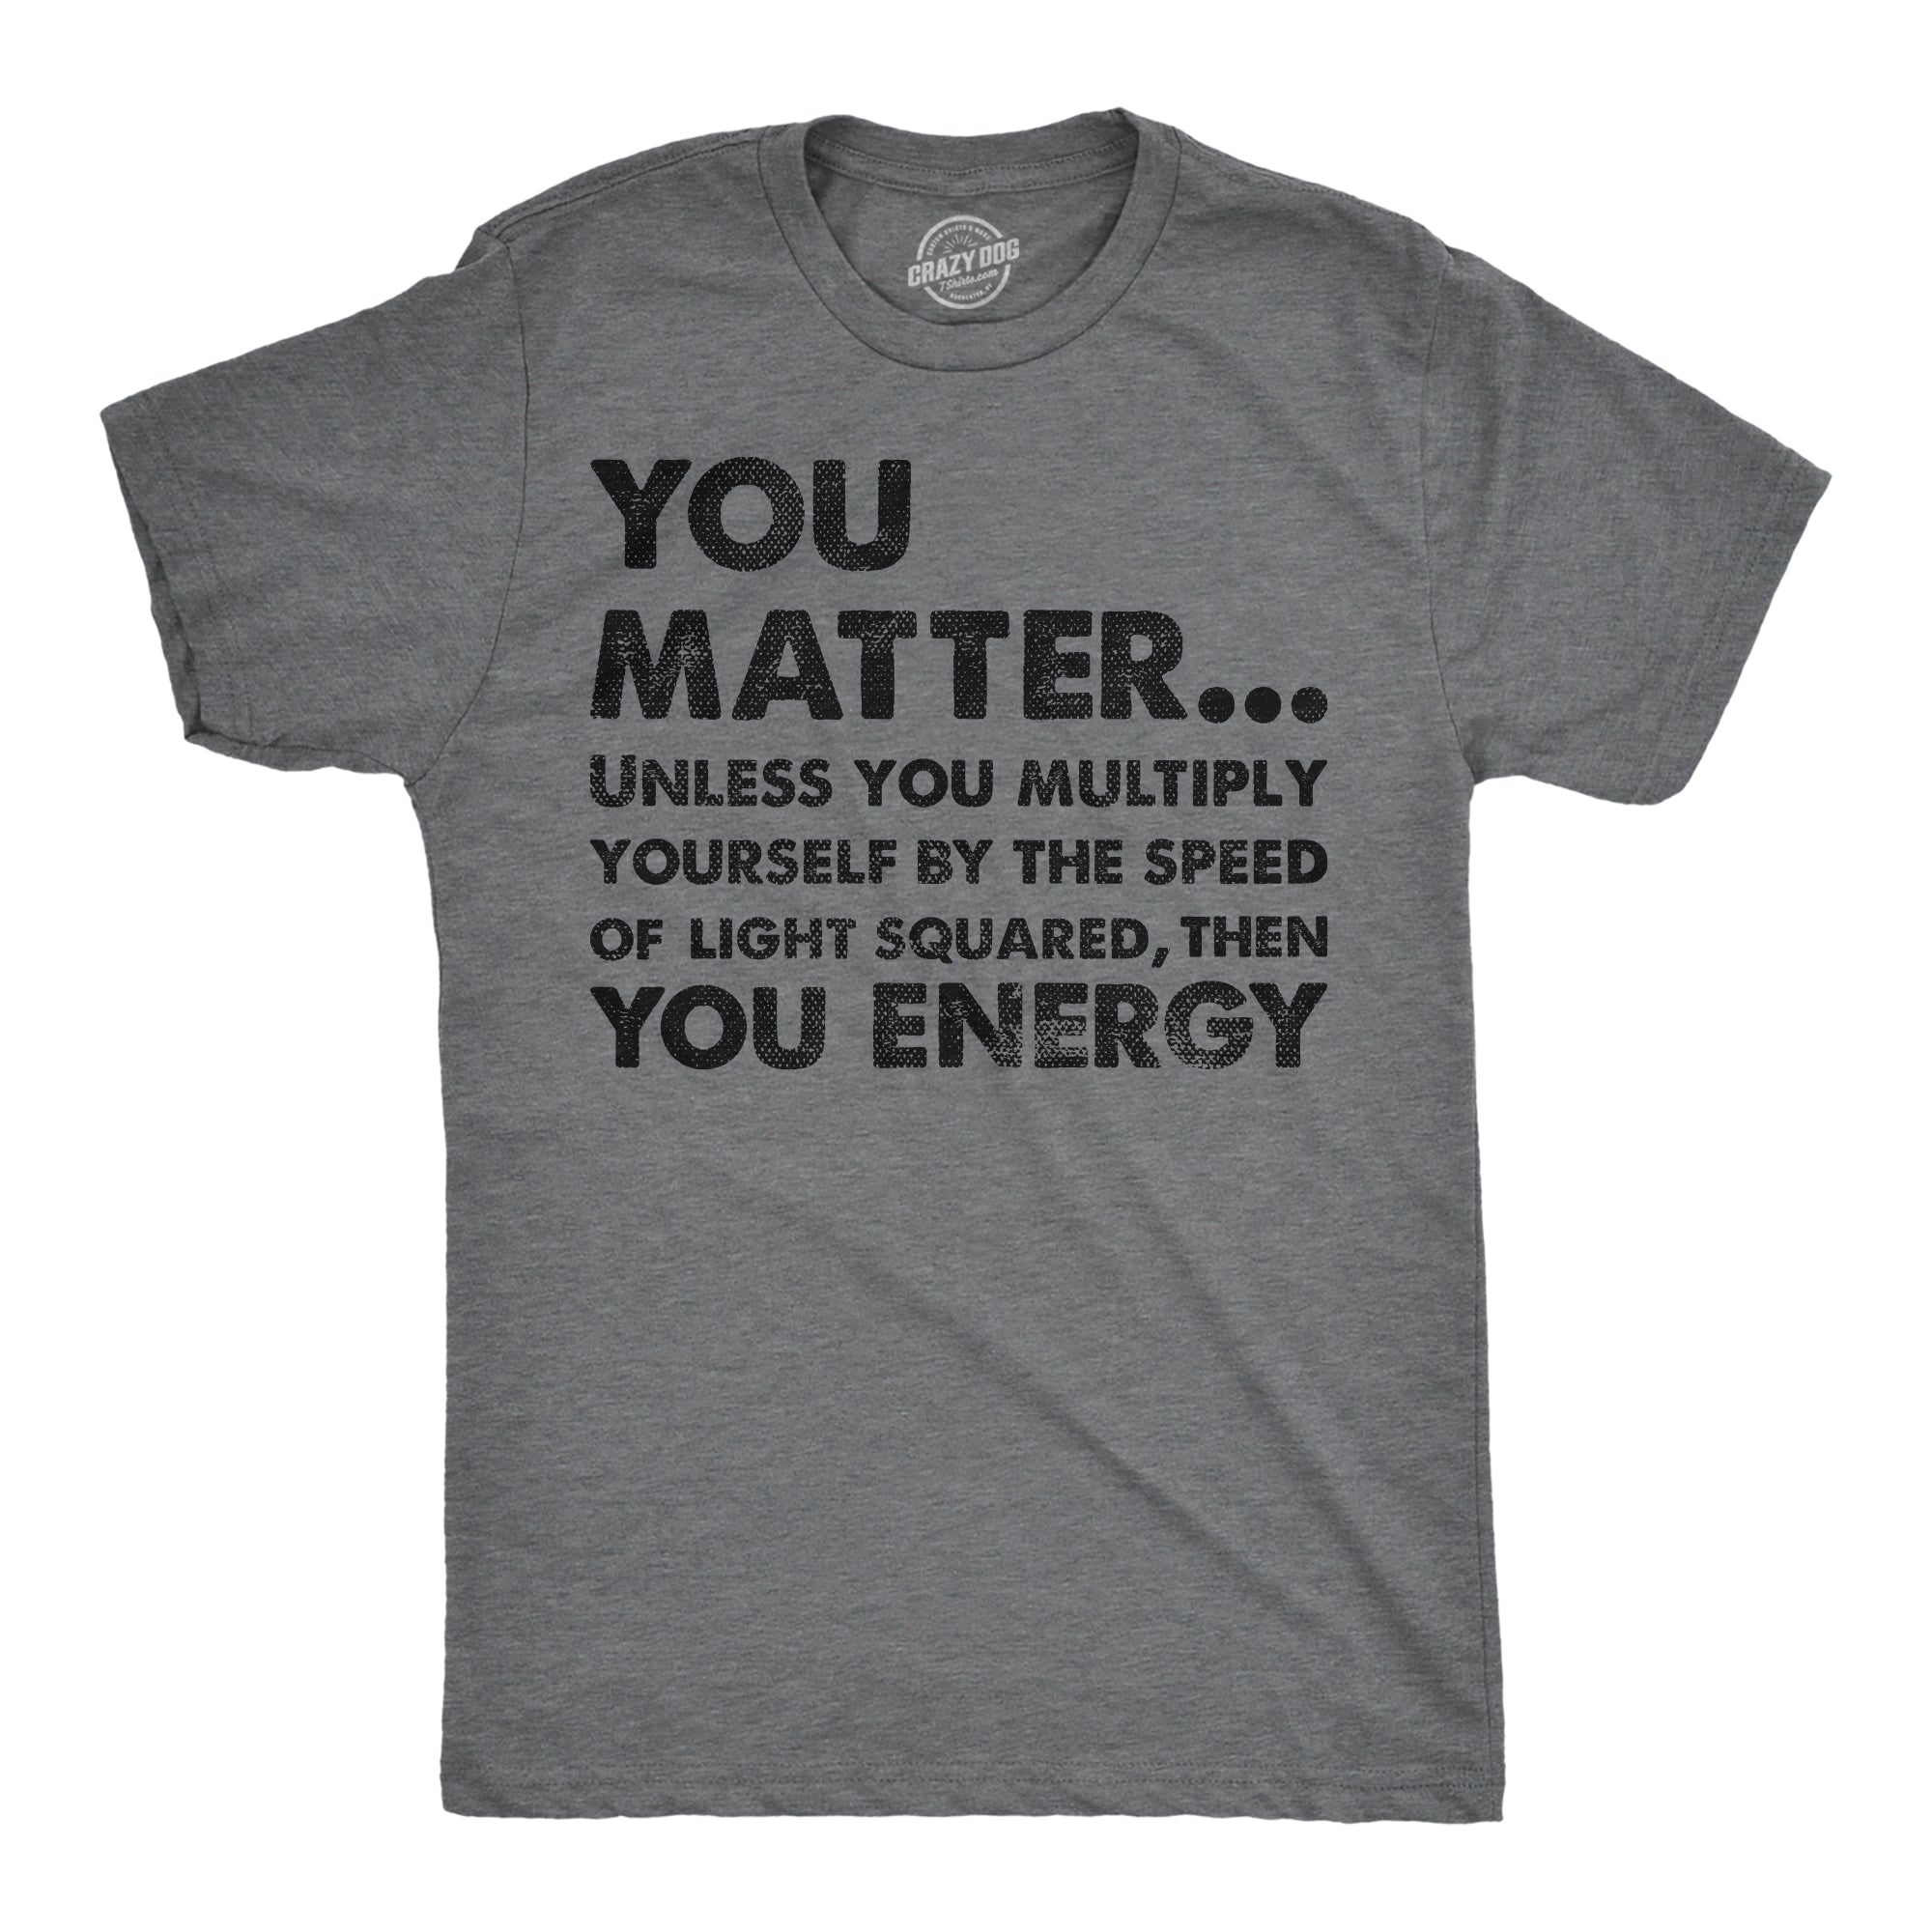 Funny Dark Heather Grey - You Matter You Energy You Matter Unless You Multiply Yourself By The Speed Of Light Squared Then You Energy Mens T Shirt Nerdy Nerdy science sarcastic Tee